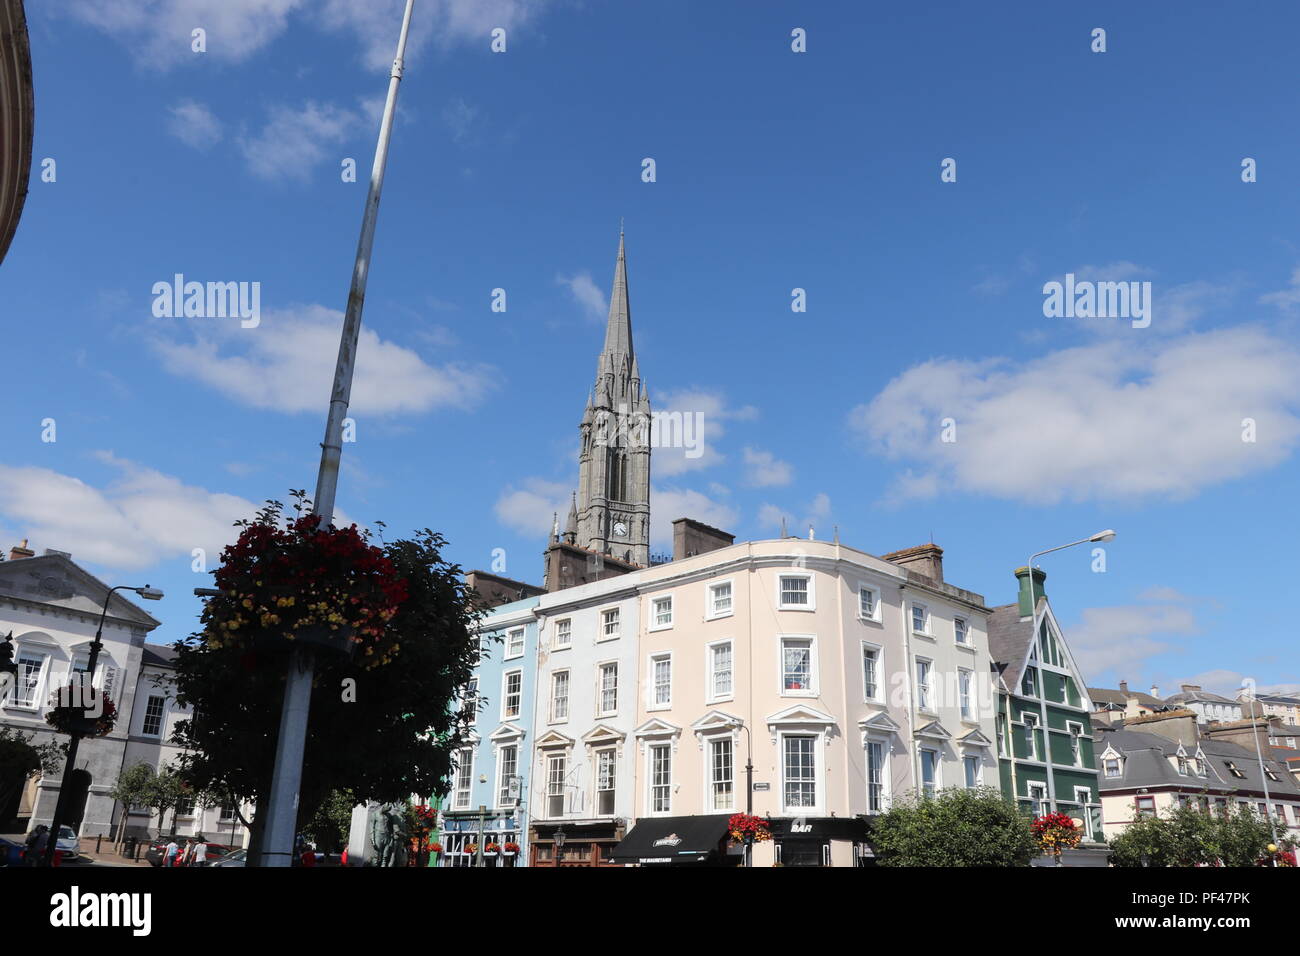 The lovely little town of Cobh, from the main square, with the magnificent centuries old Cathedral as a focal point. Stock Photo